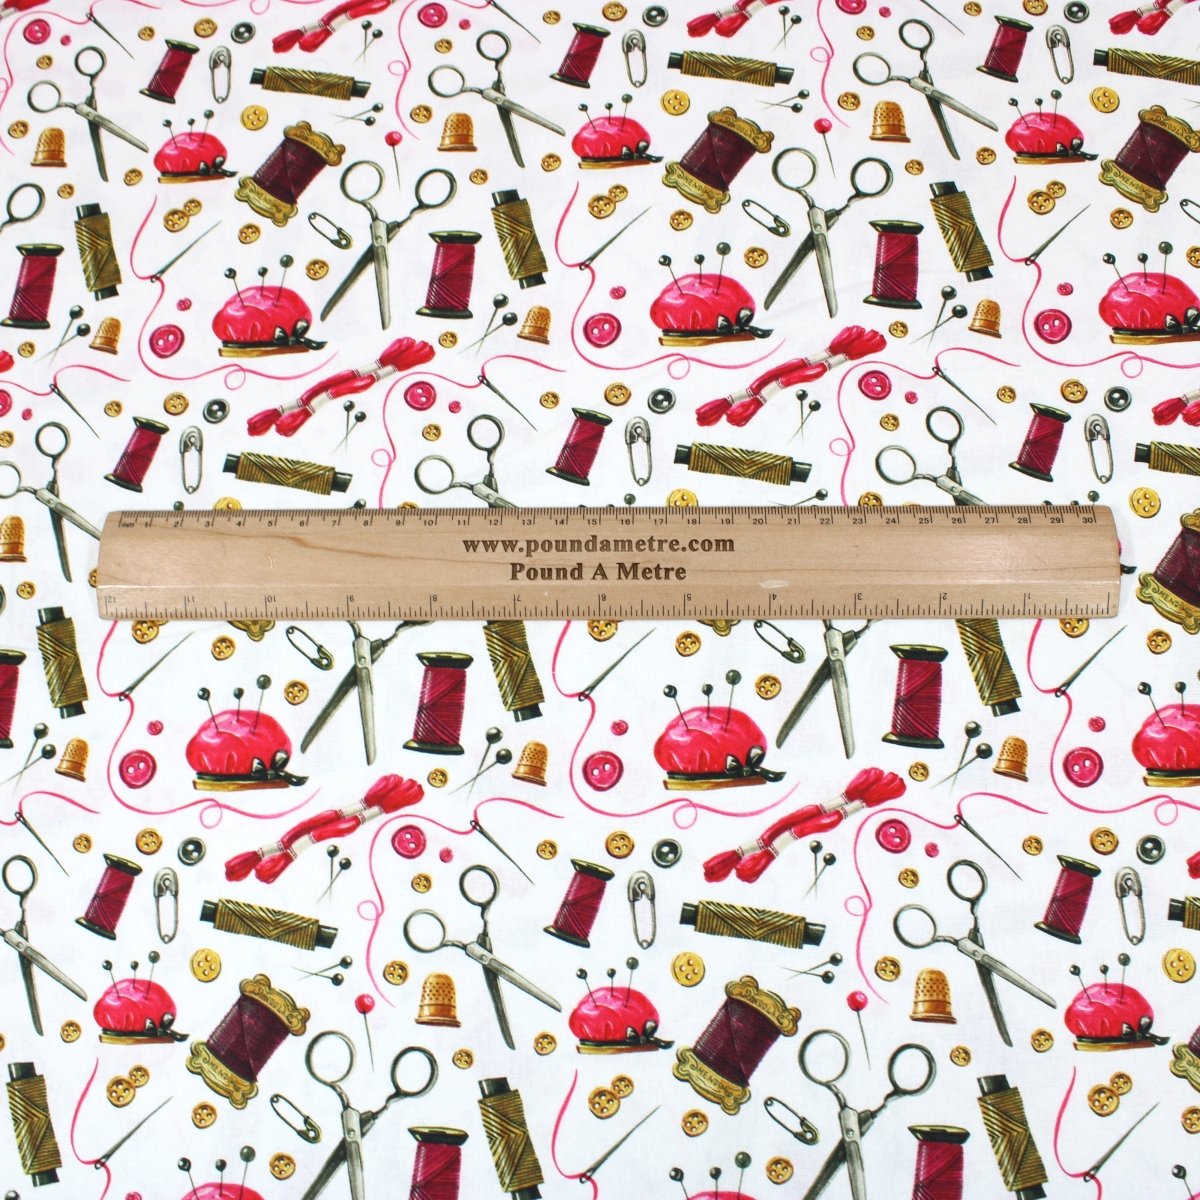 Per Metre Digitally Printed 100% Cotton- 45" Wide (Vibrant Sewing) - Pound A Metre